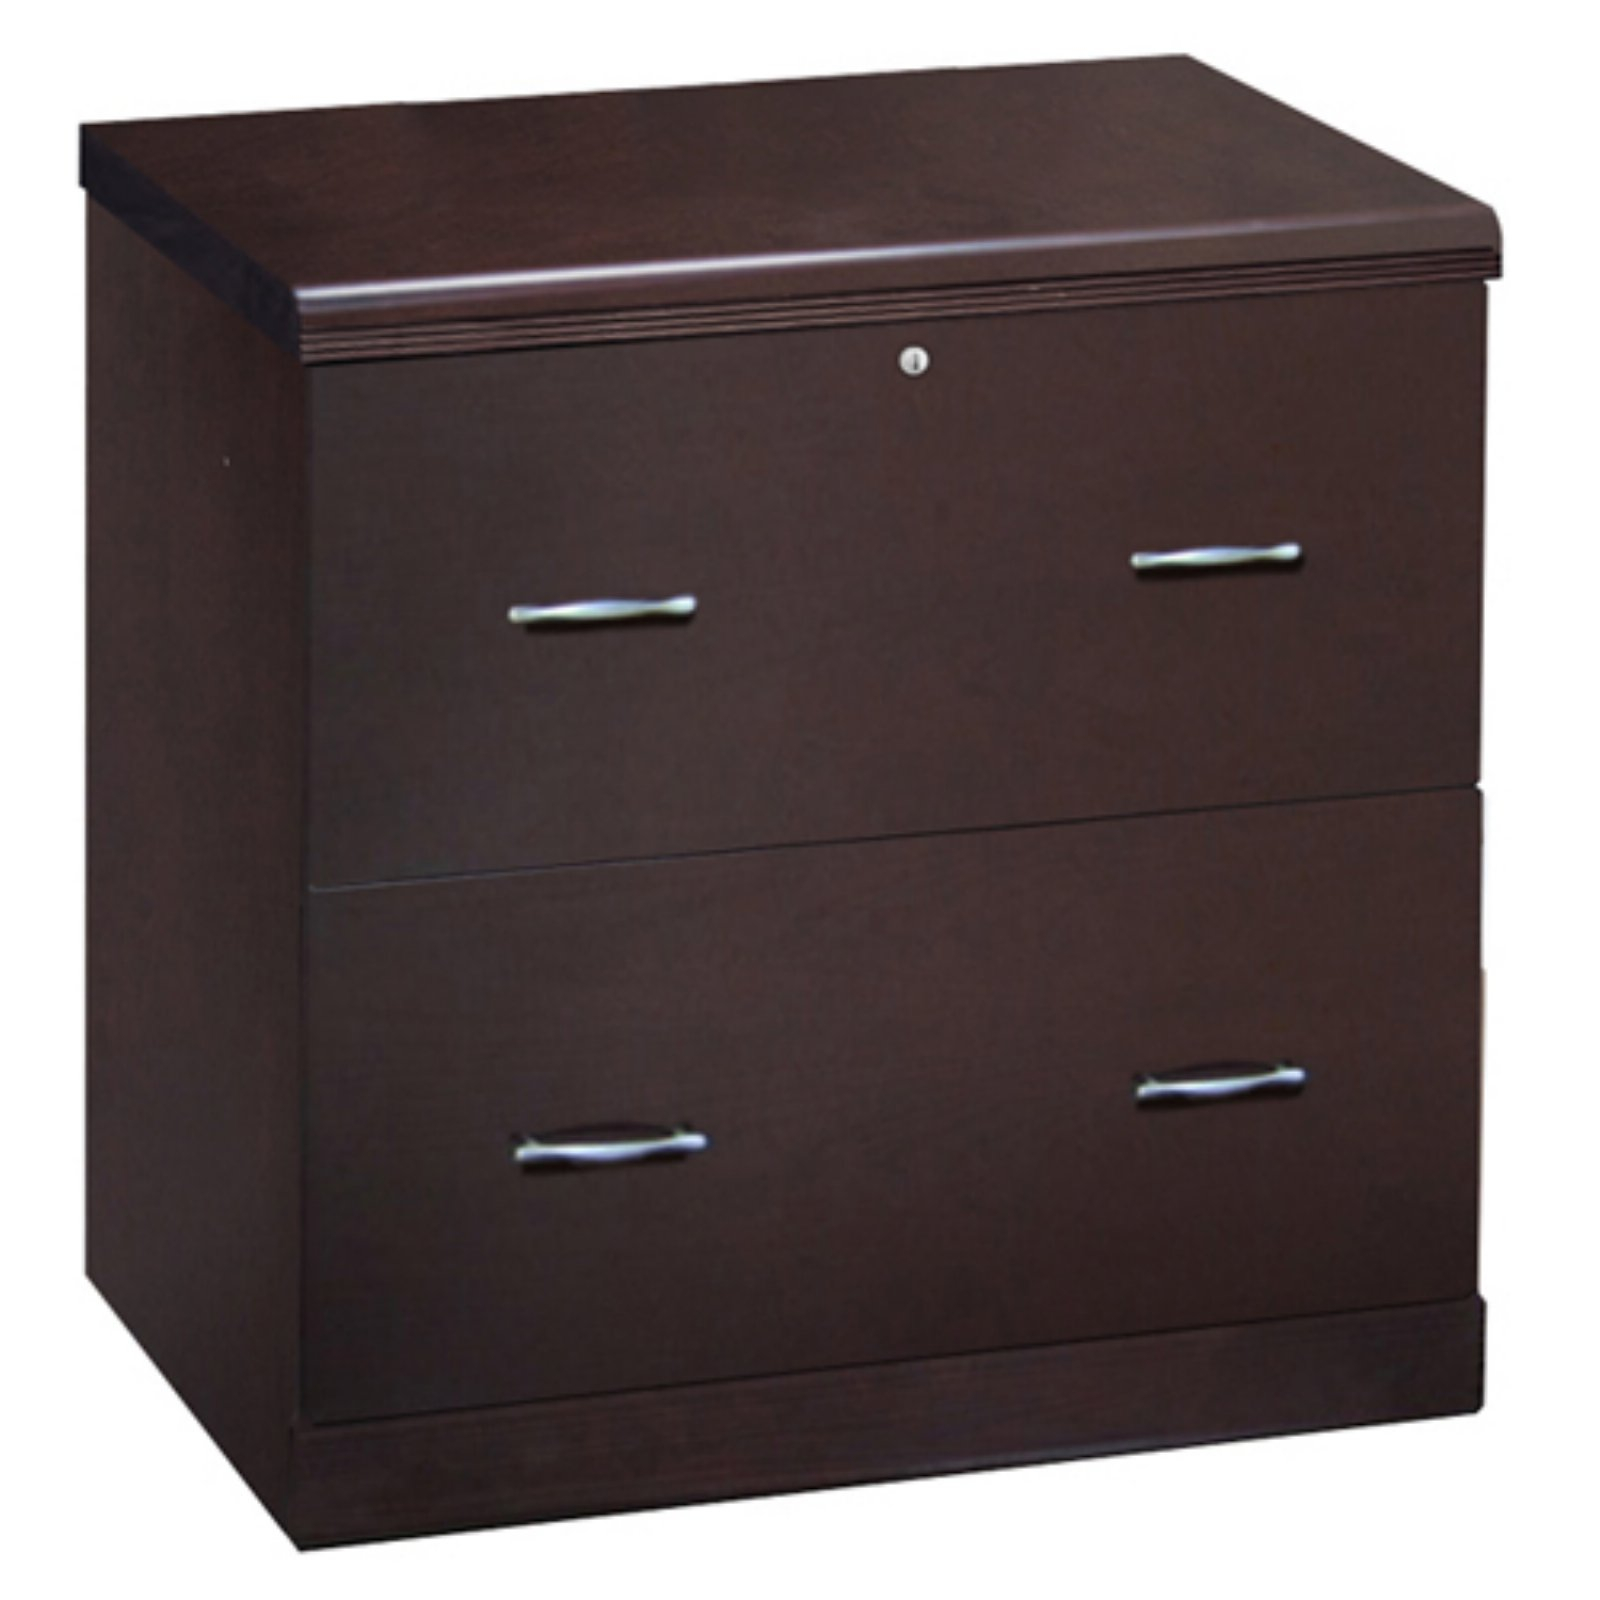 2 Drawer Lateral Wood Lockable Filing Cabinet Espresso Walmart throughout dimensions 1600 X 1600